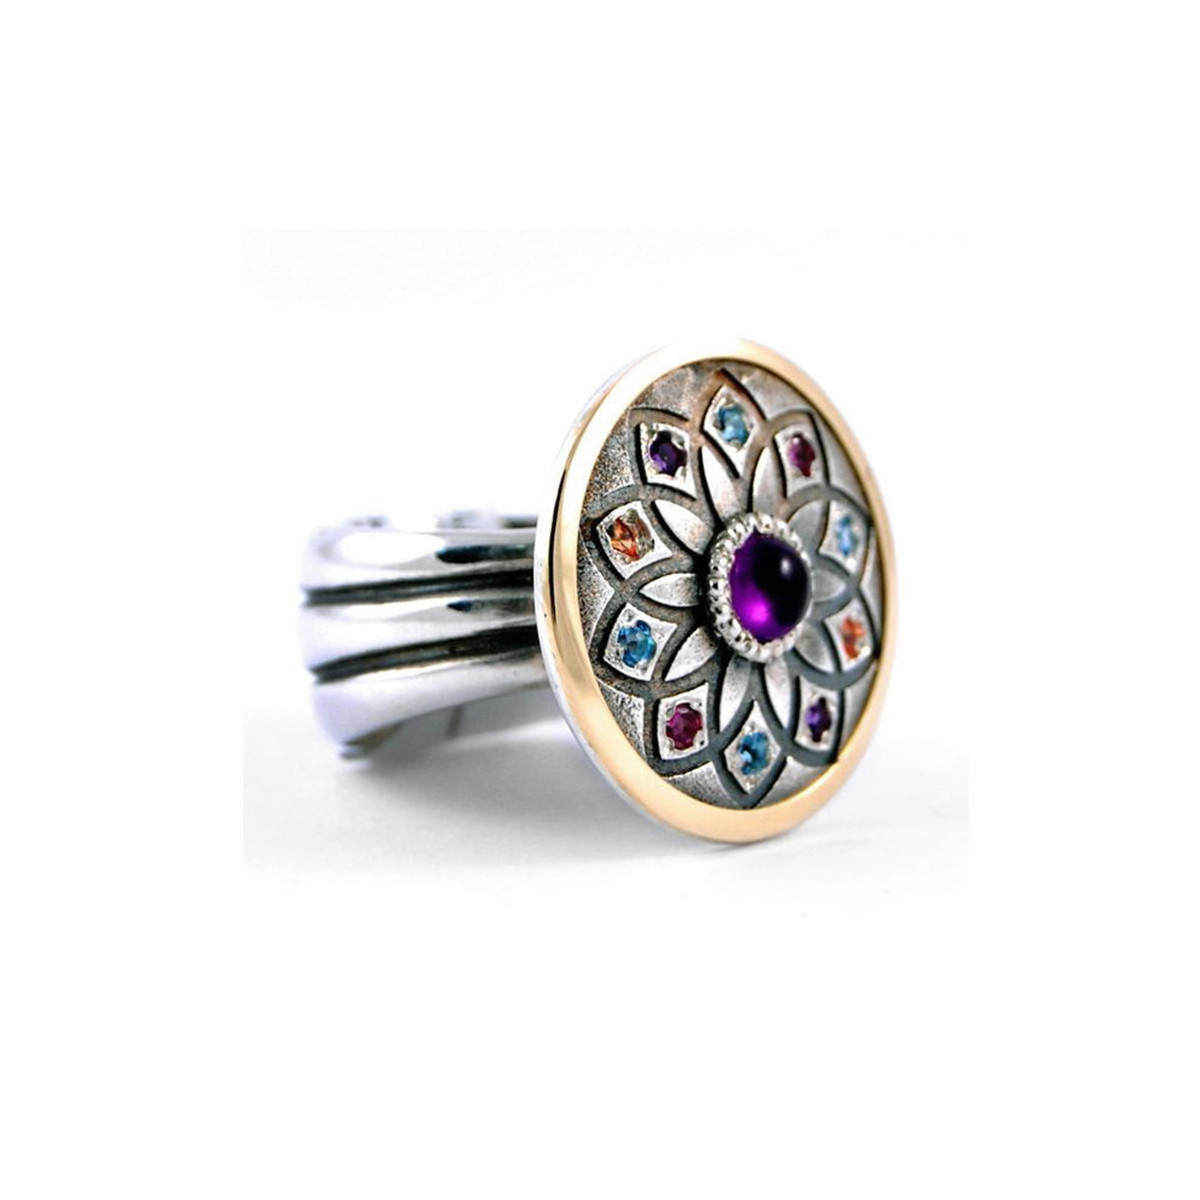 STERLING SILVER AND GOLD RING WITH COLORED STONES